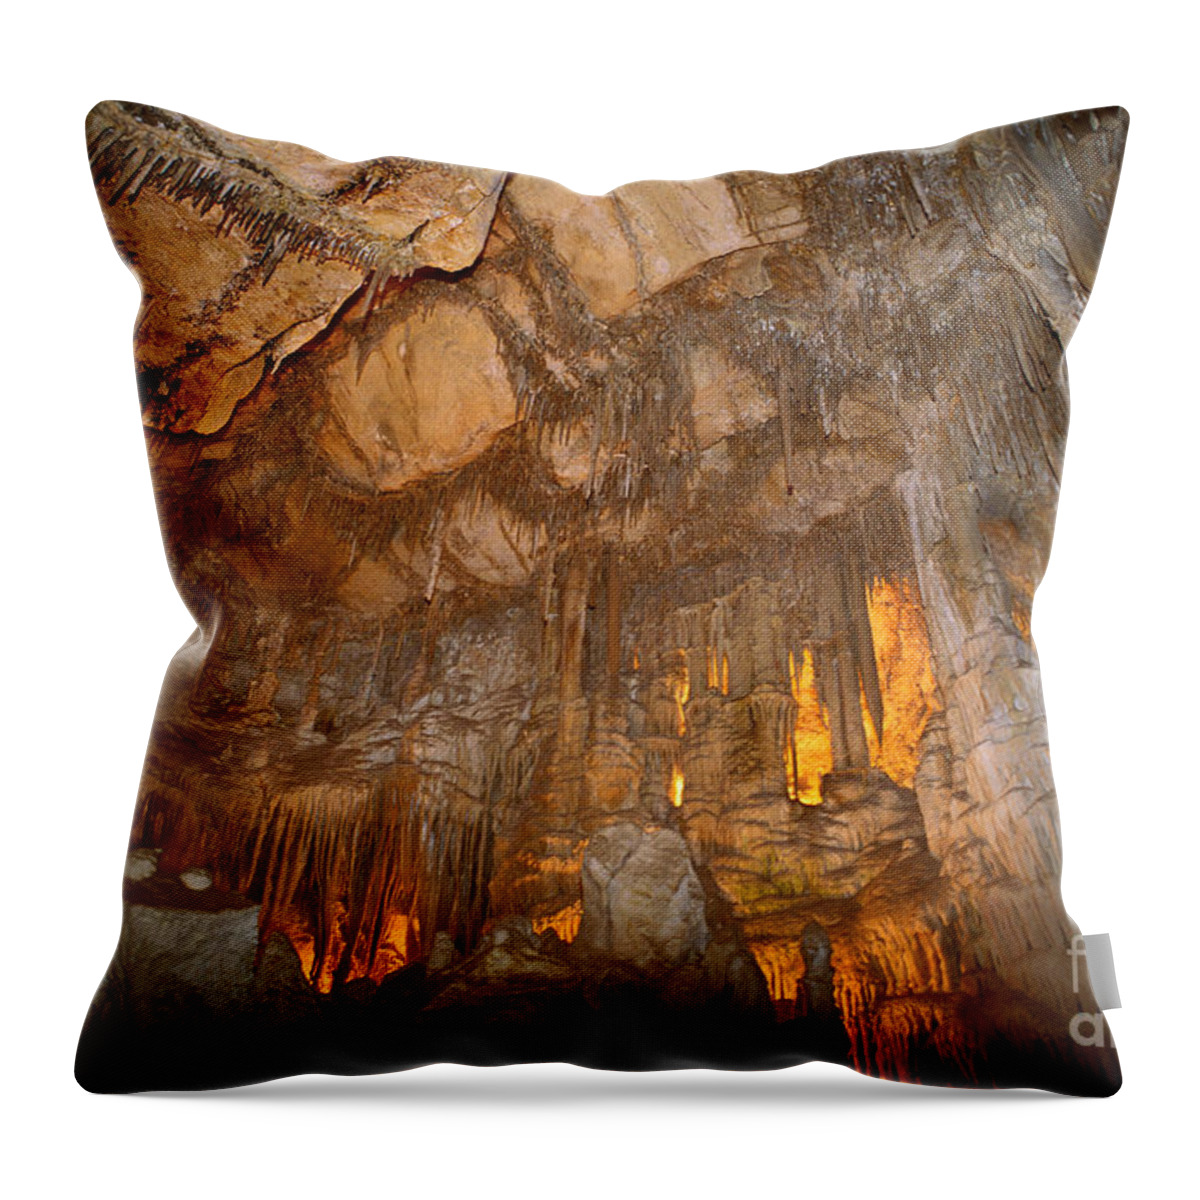 Geology Throw Pillow featuring the photograph Stalactites In Lehman Cave, Great Basin by Ron Sanford